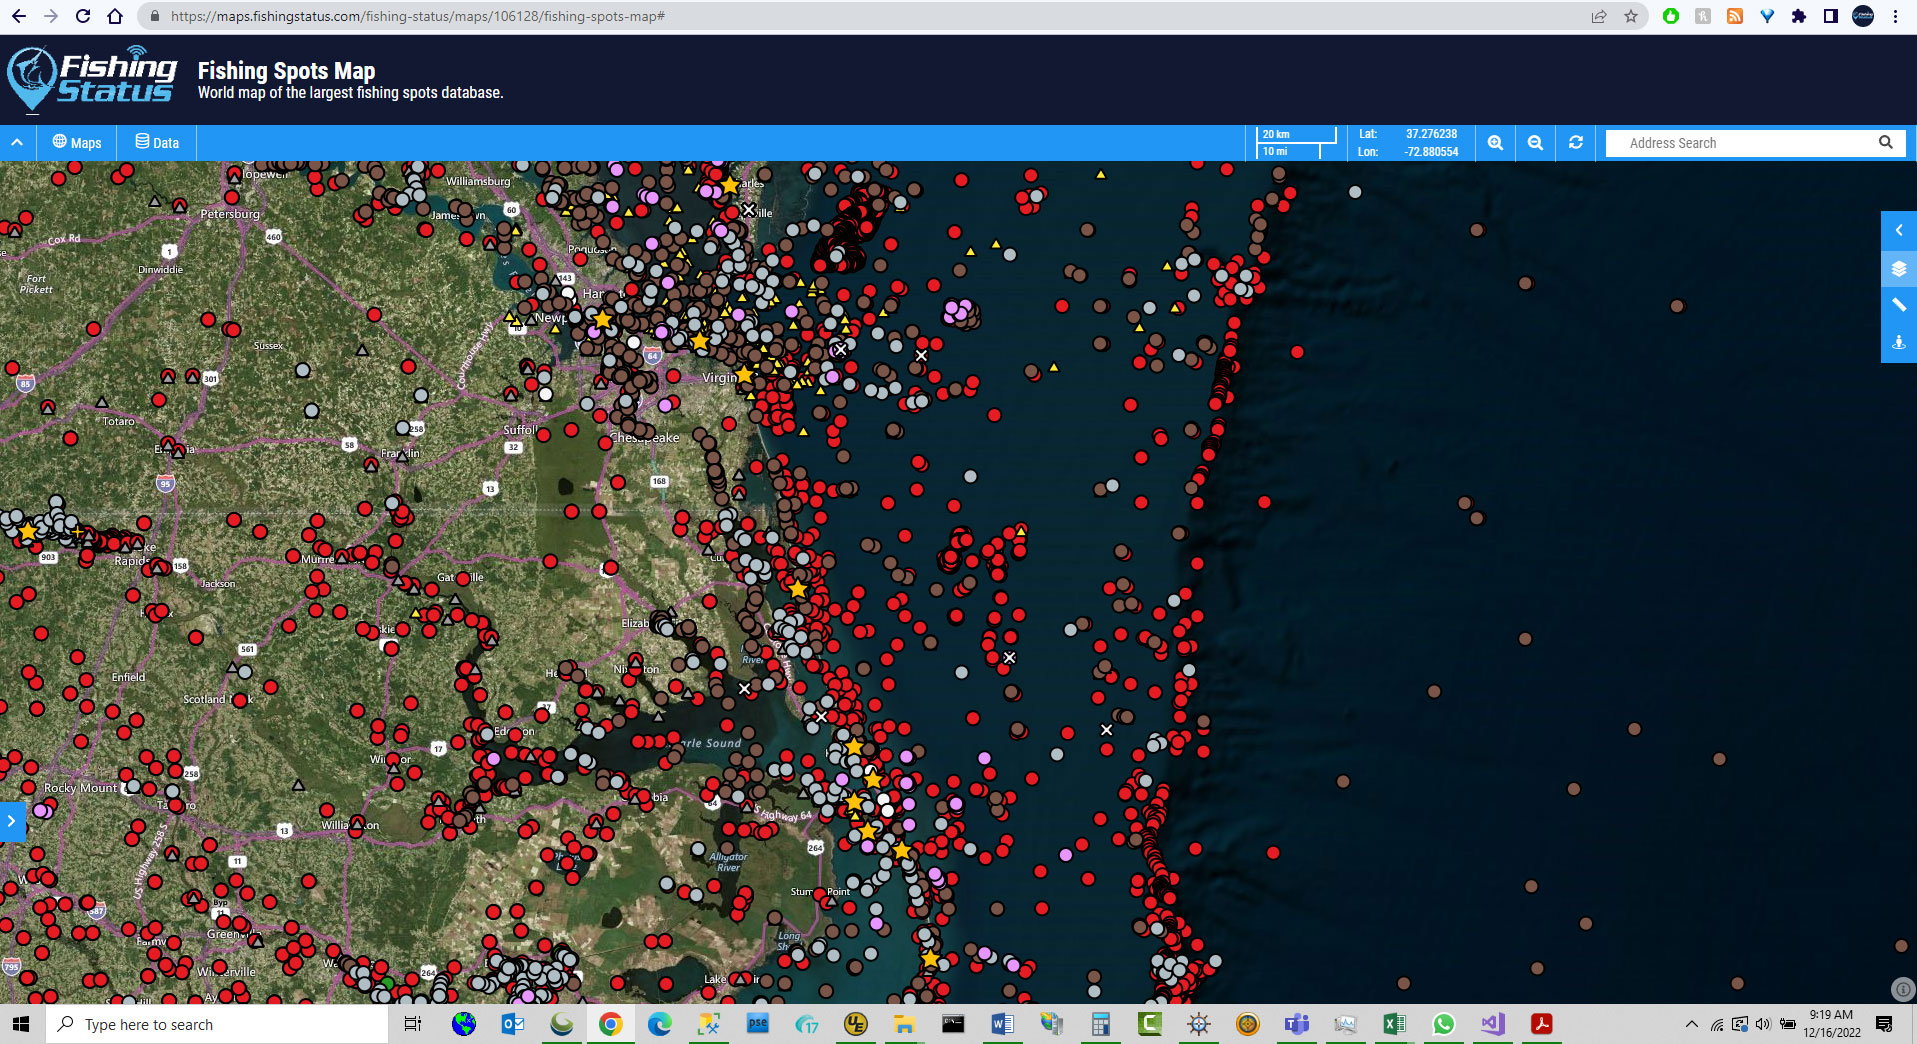 New Jersey Fishing Spots - How this Works - New Jersey GPS Fishing Spots